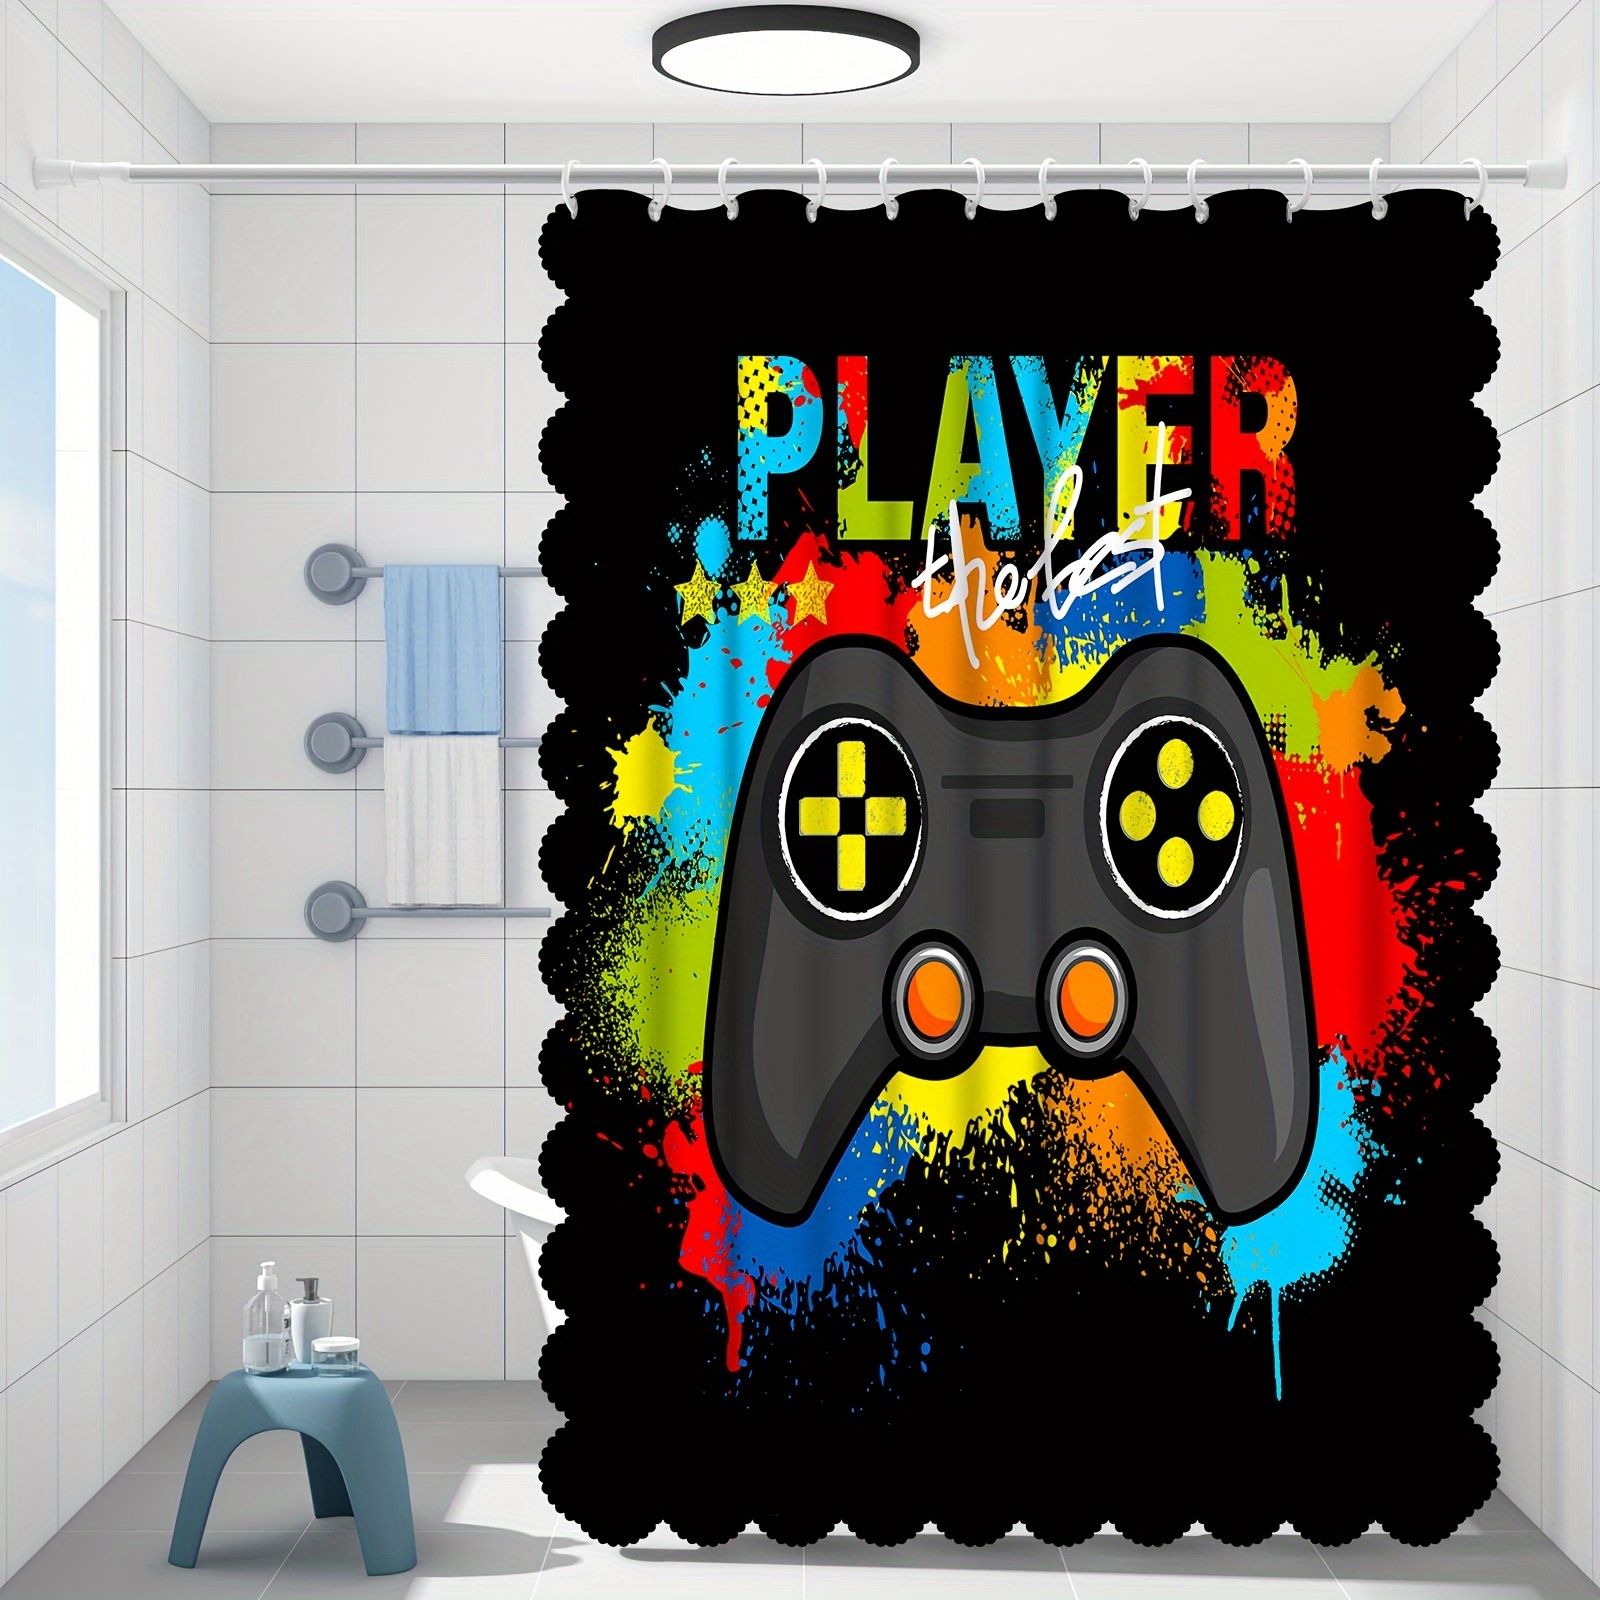 Play Game Shower Curtain Sets with Rugs Bathroom Accessories